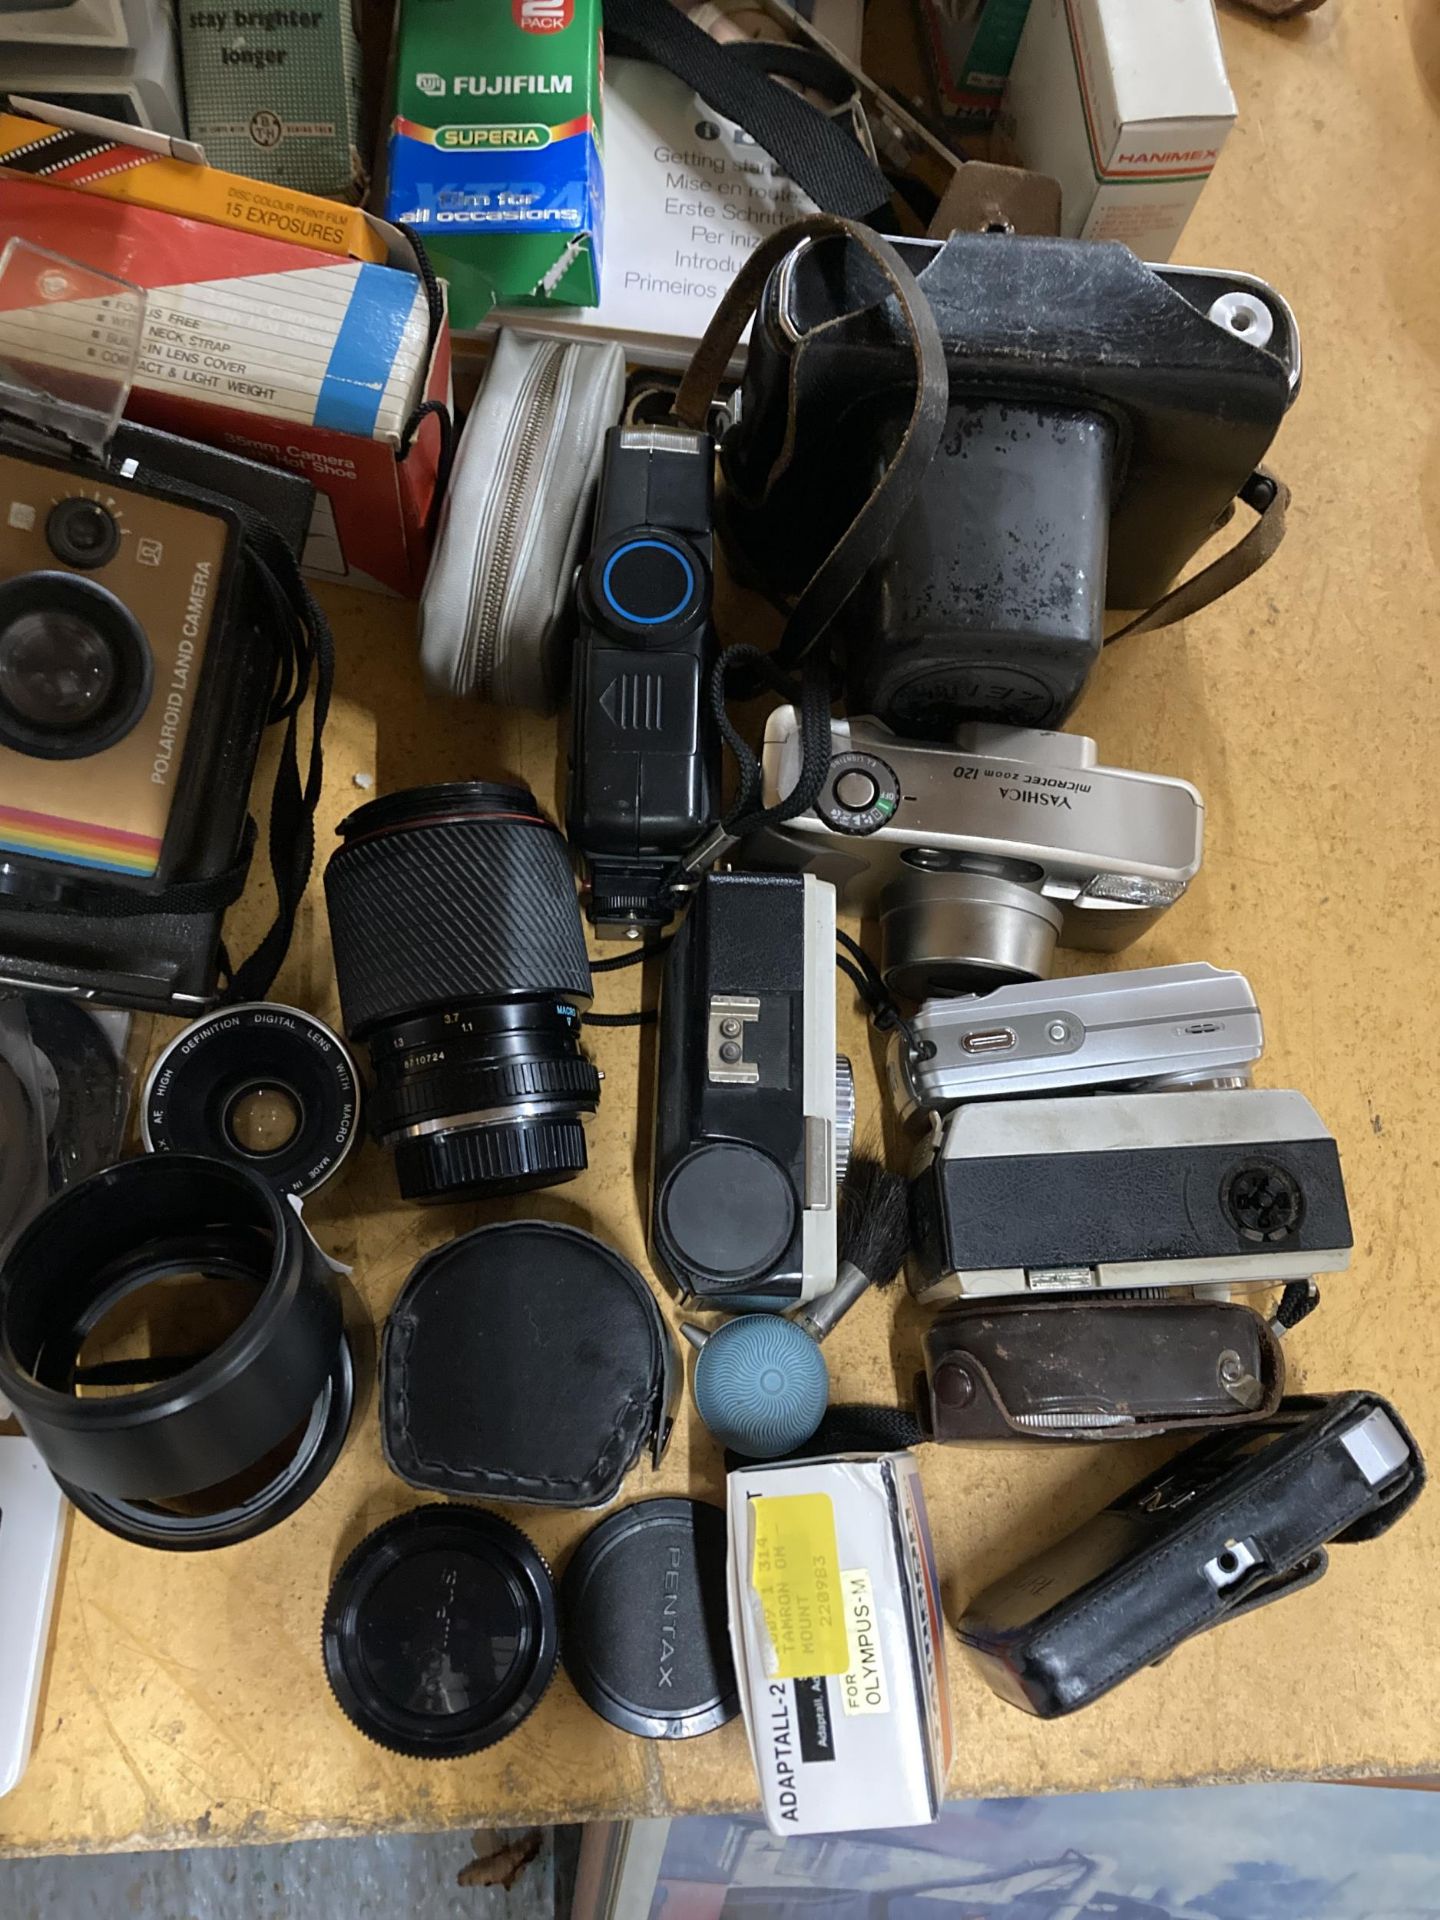 A LARGE COLLECTION OF CAMERA RELATED AND FURTHER EQUIPMENT, CAMERAS, BAGS, PHONES, CALCULATORS ETC - Image 5 of 9